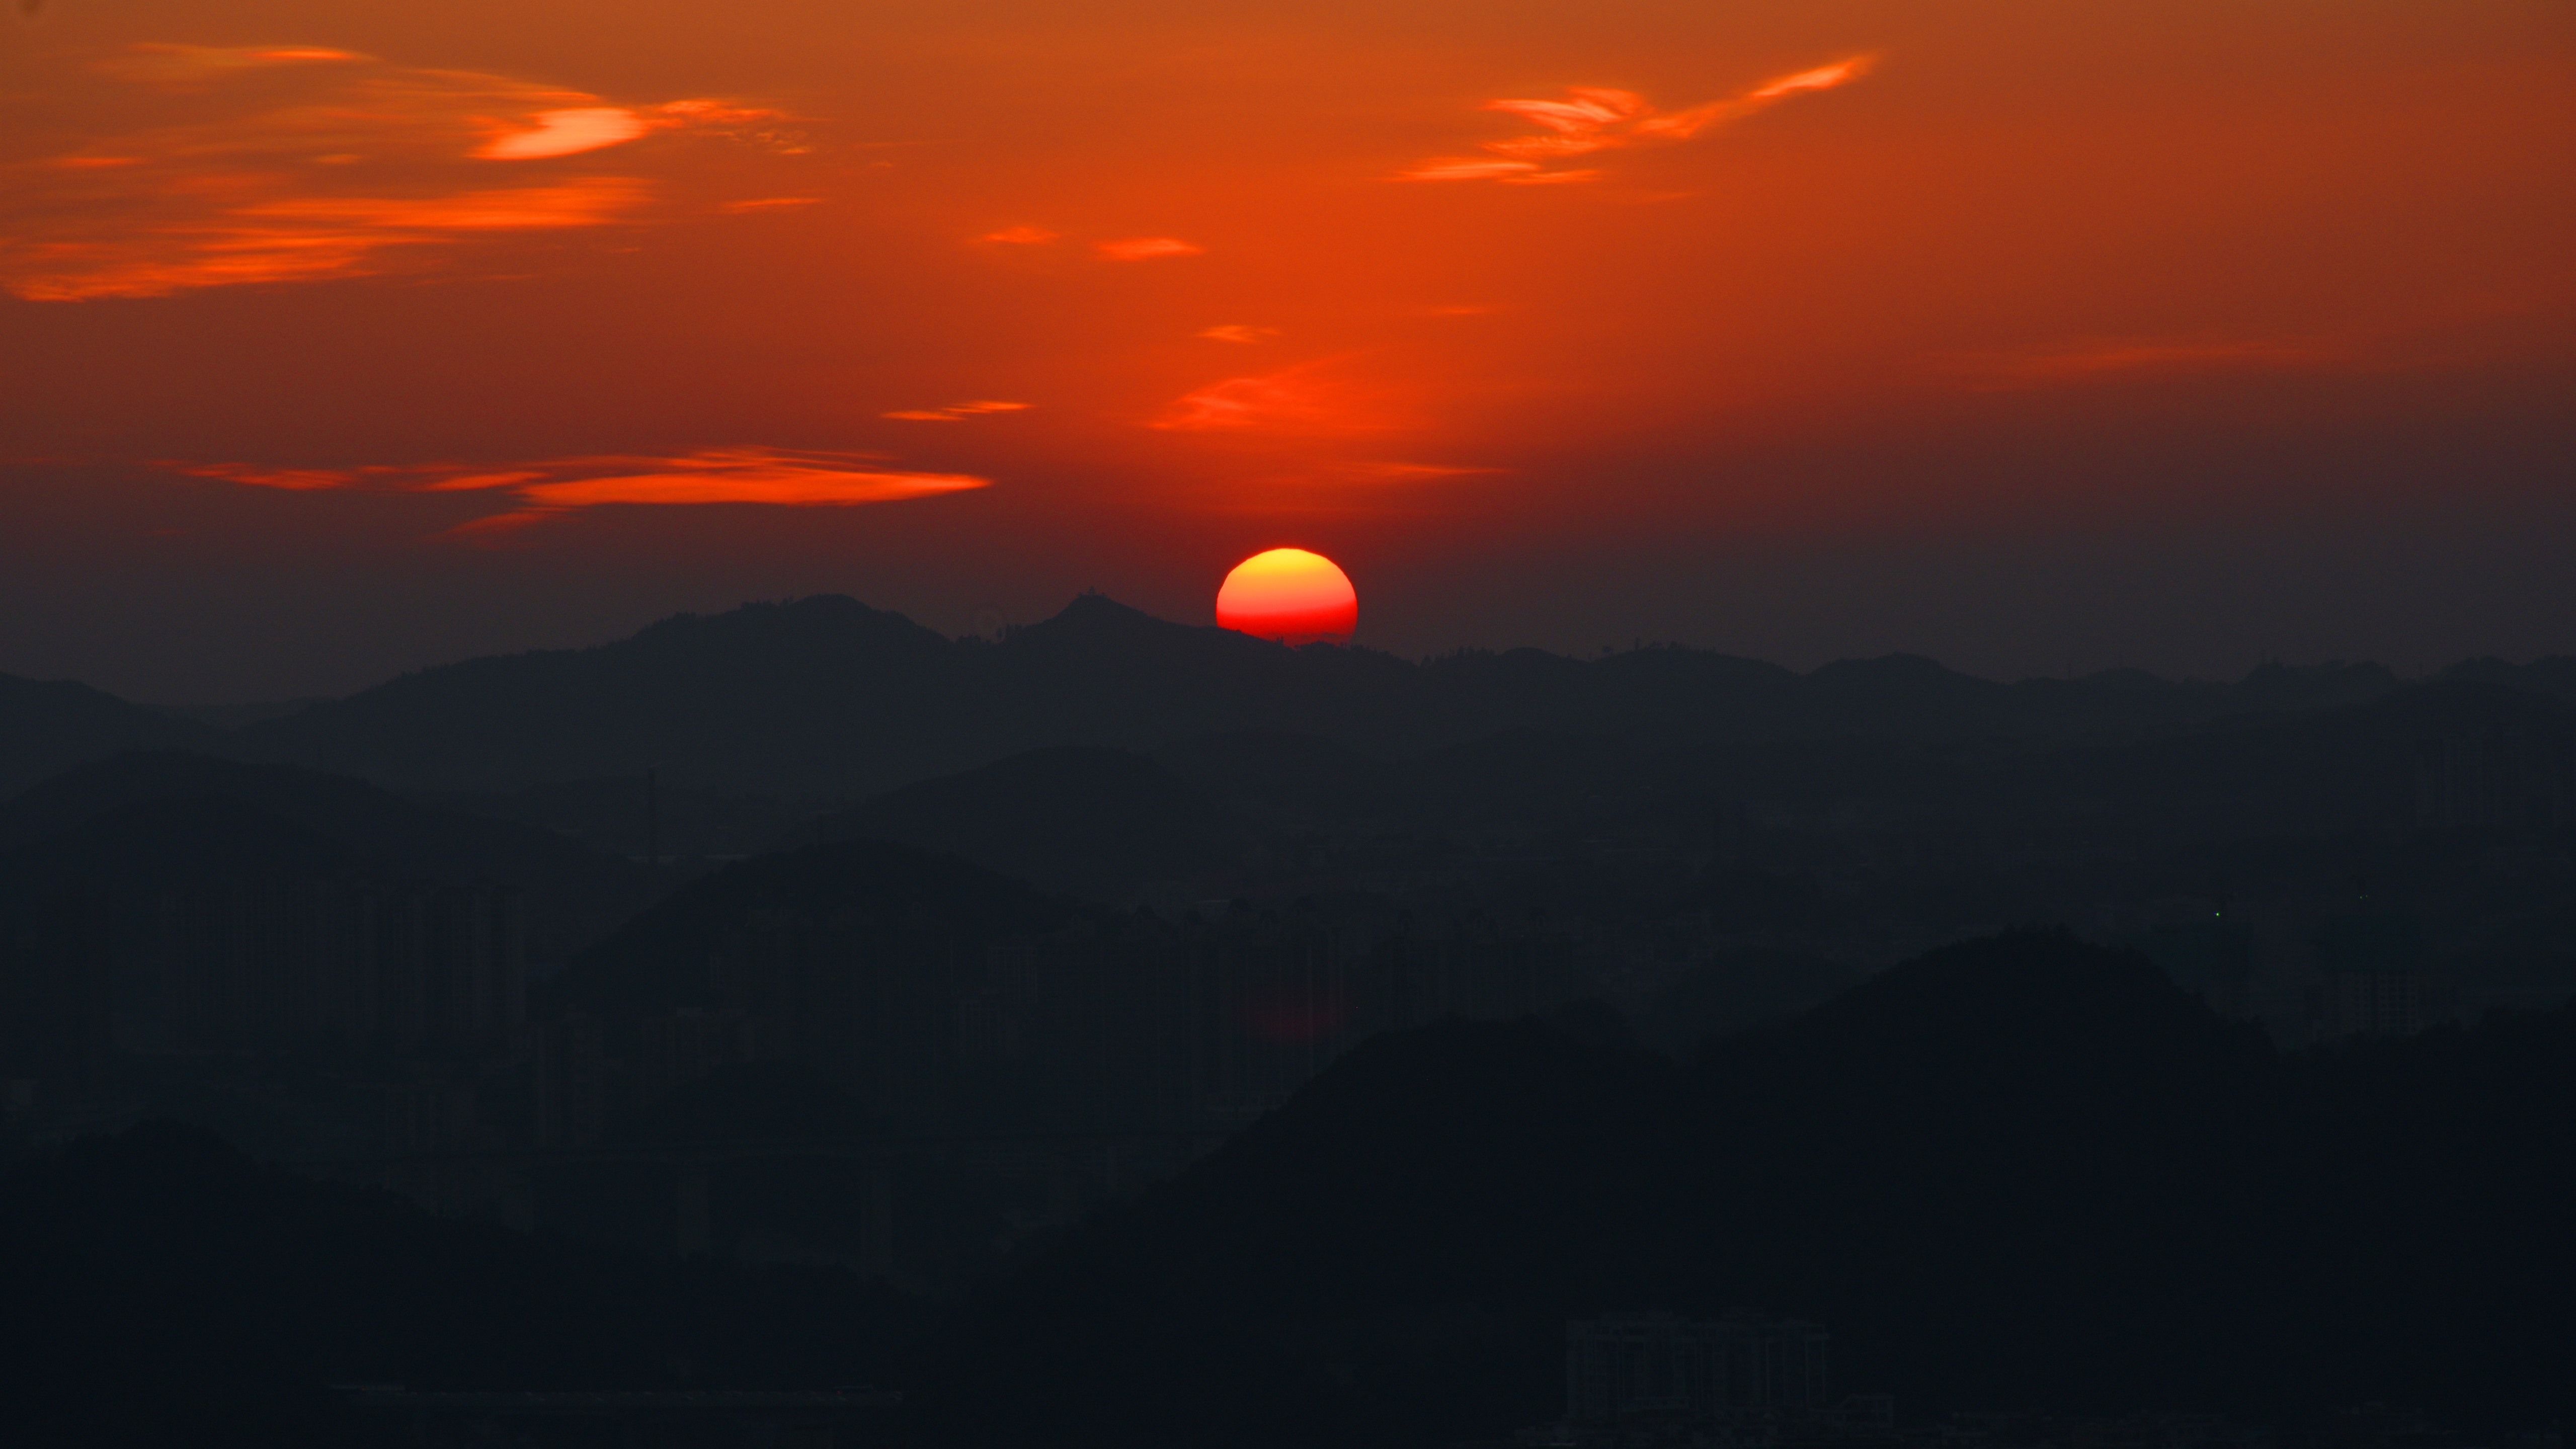 Wallpaper Beautiful sunset, mountains, red sun 5120x2880 UHD 5K Picture, Image